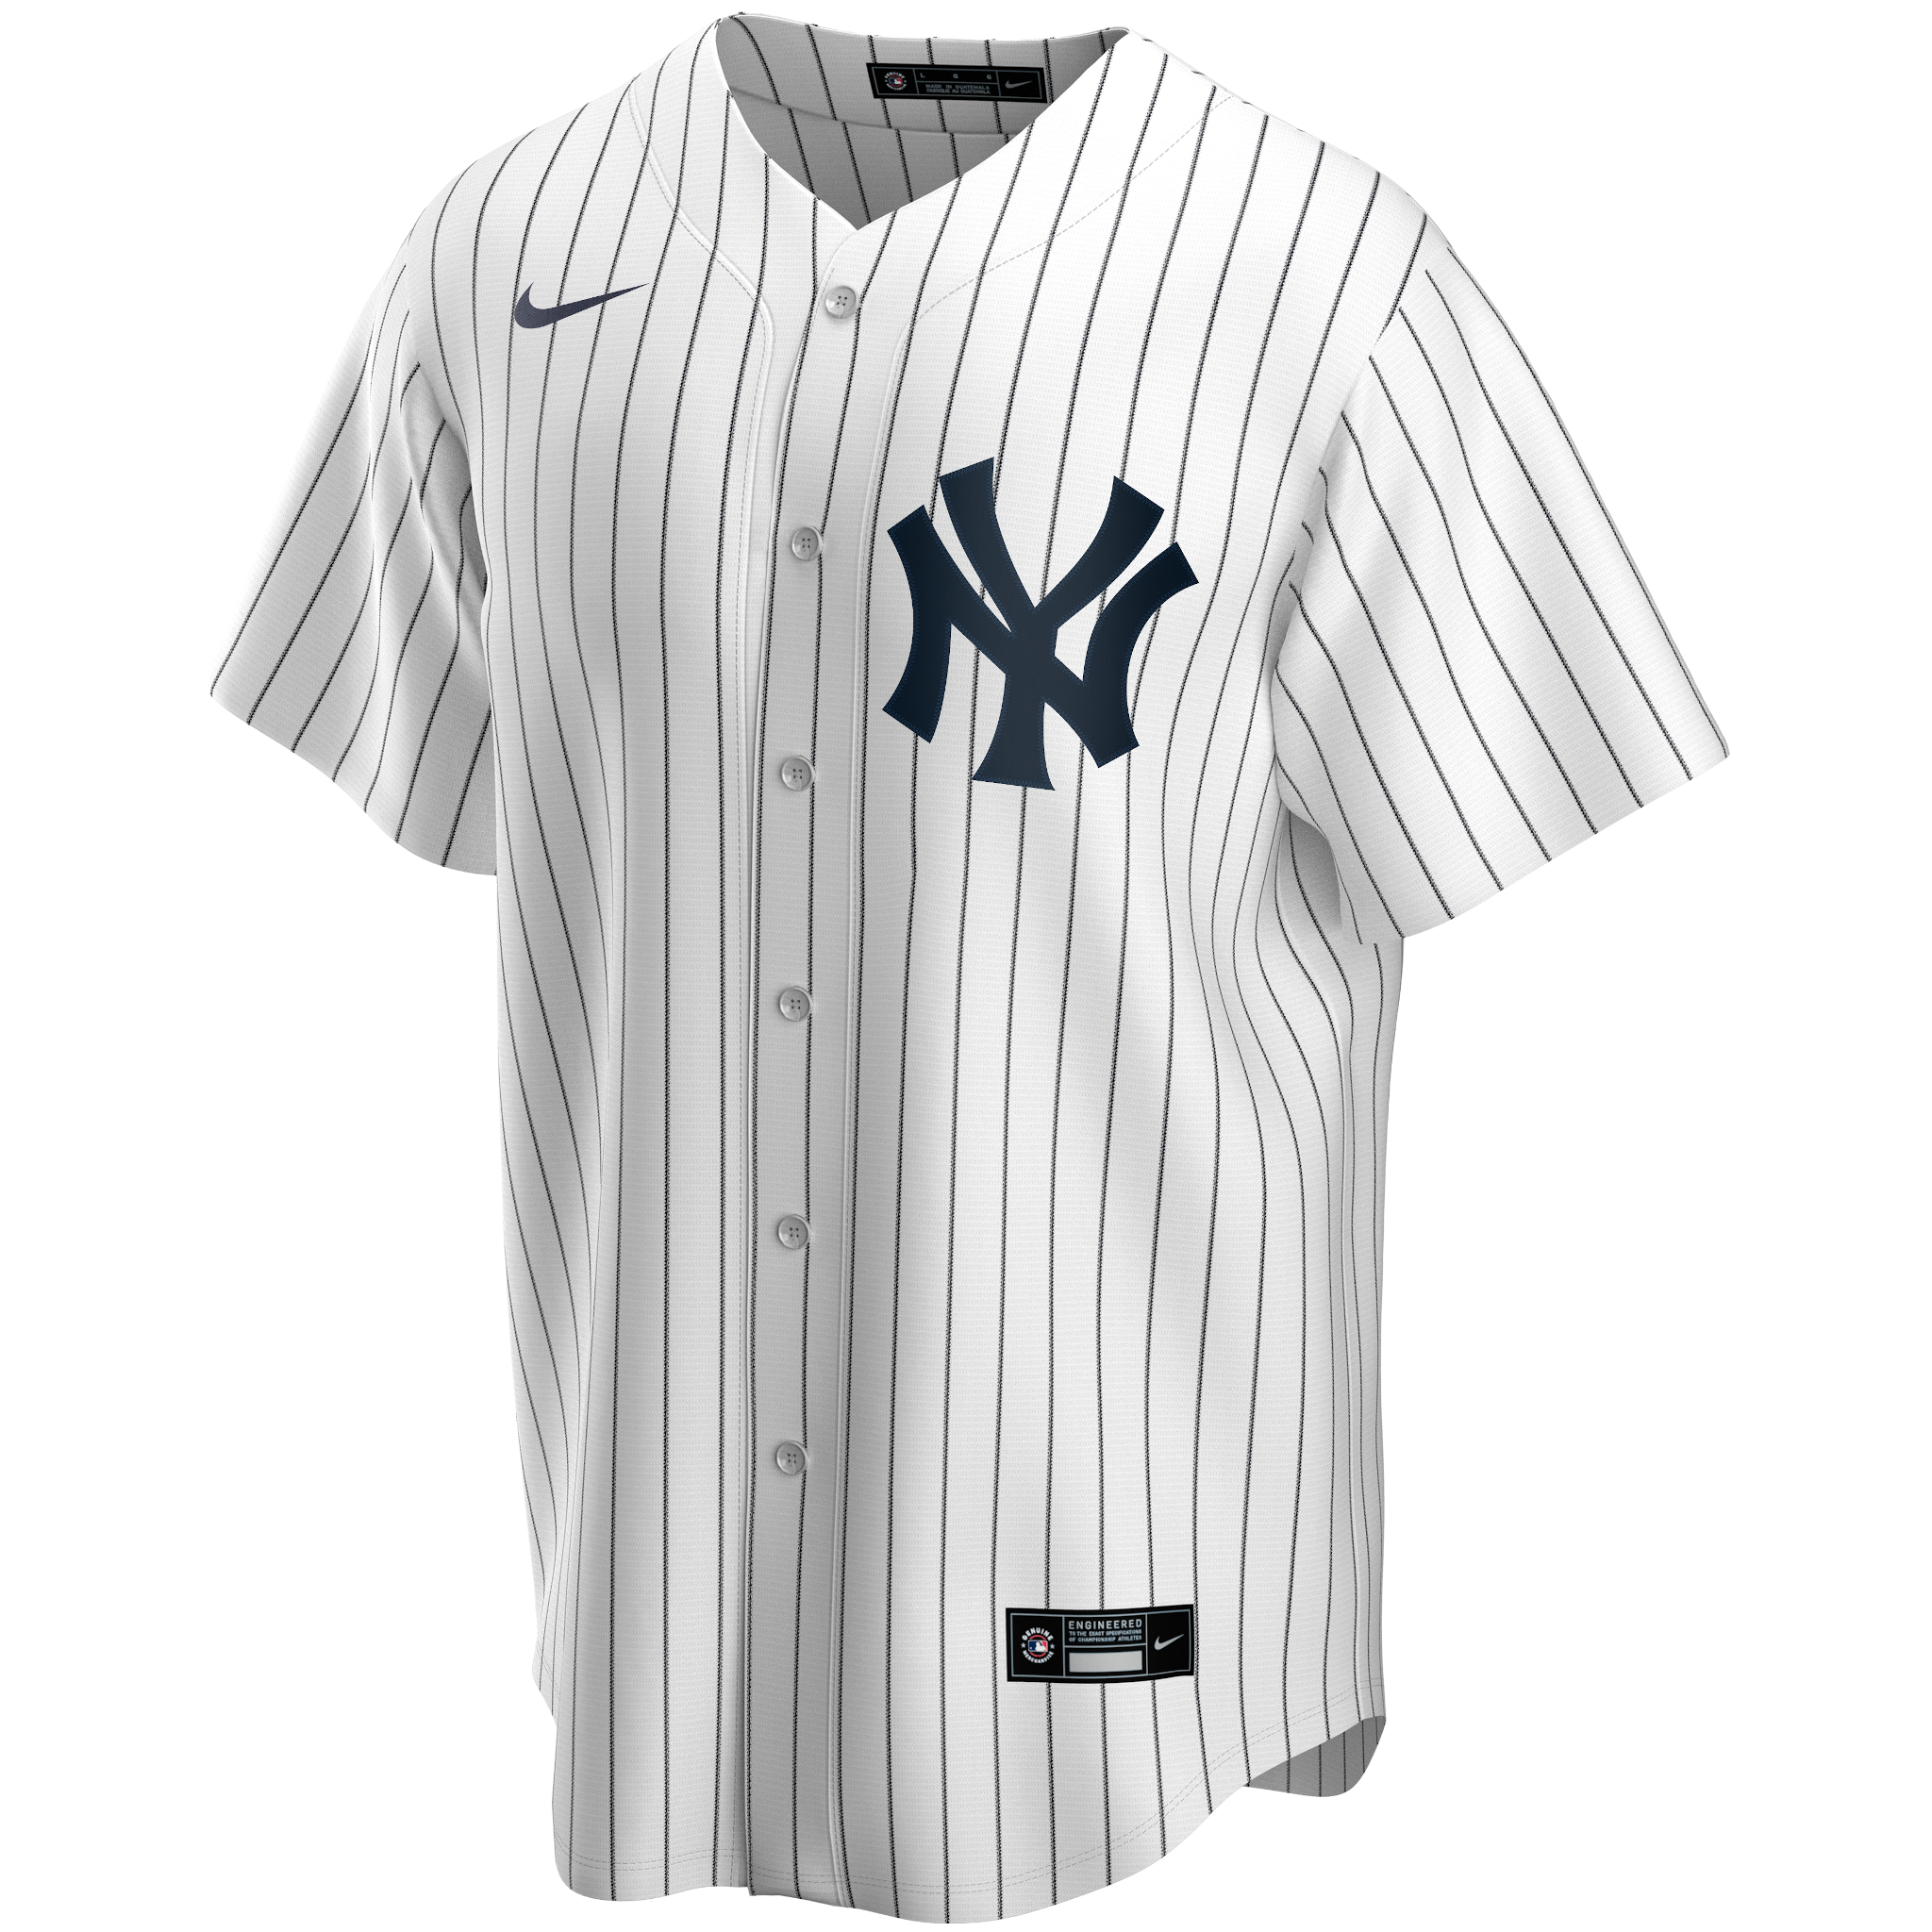 Lids DJ LeMahieu New York Yankees Fanatics Authentic Game-Used #26 White  Pinstripe Jersey vs. San Francisco Giants on March 30, 2023